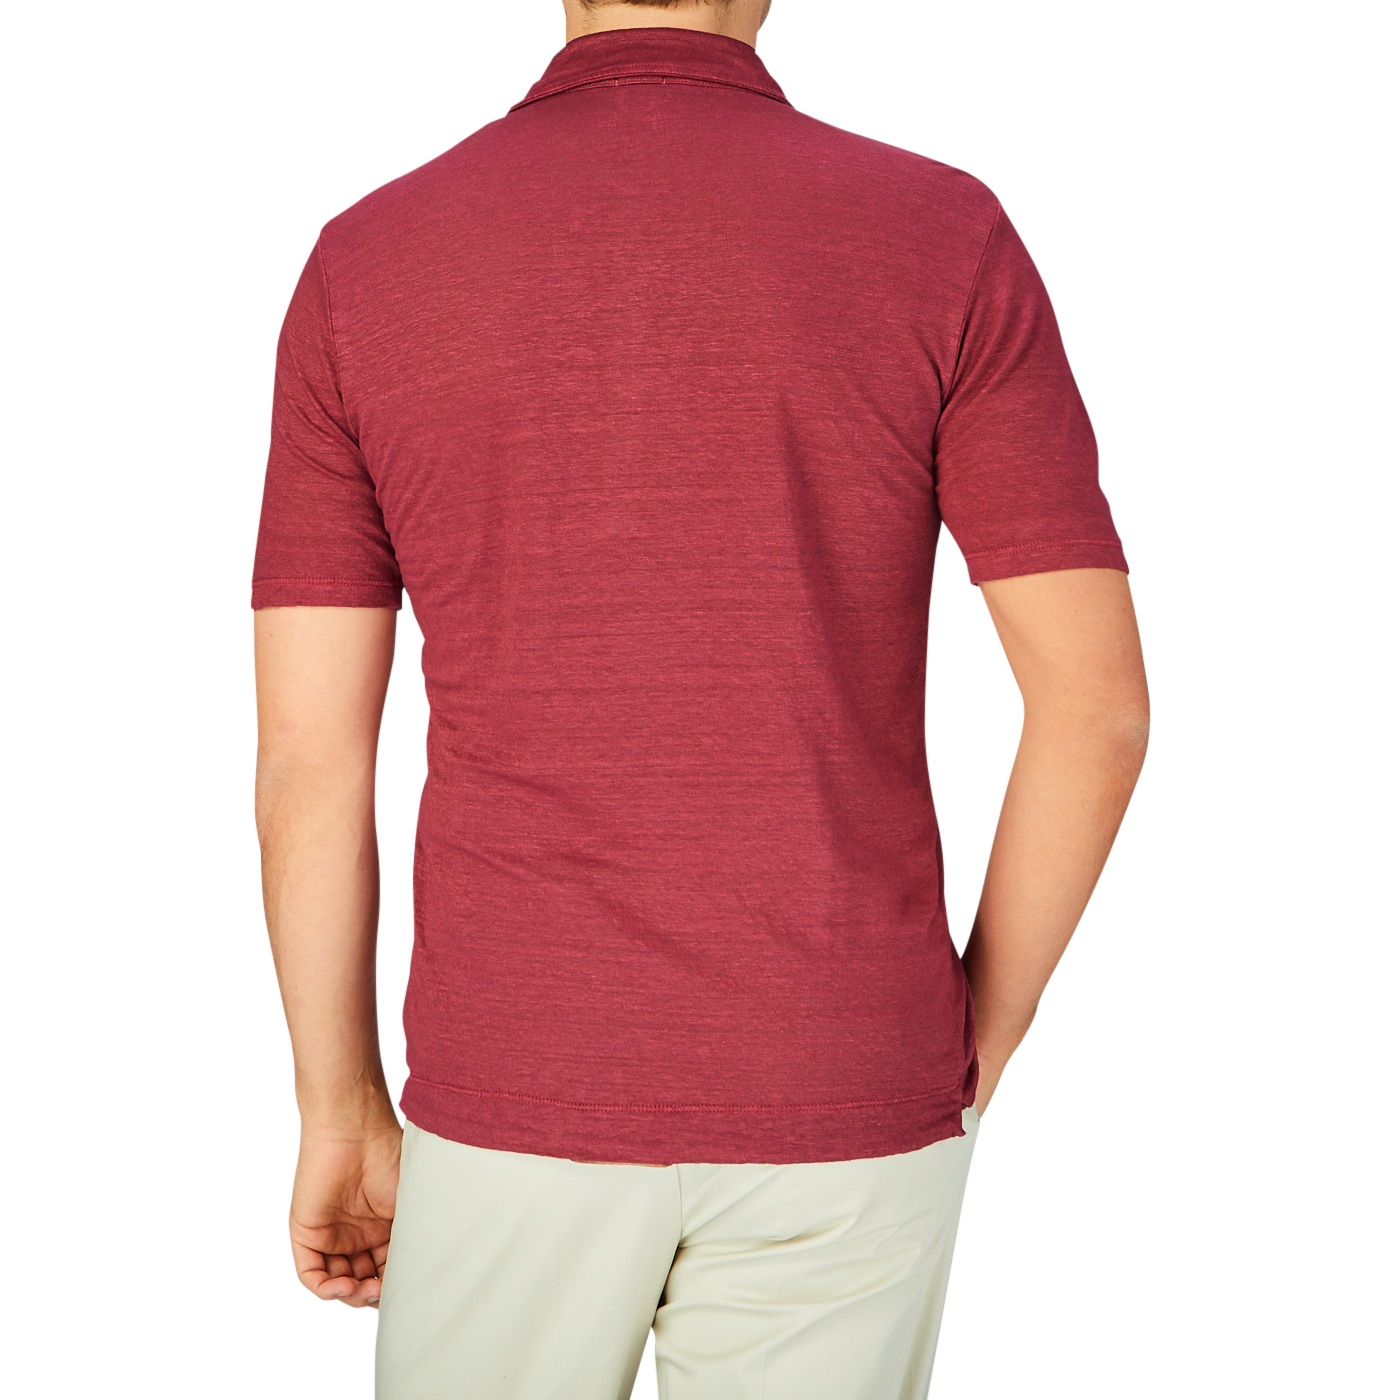 A man viewed from behind, wearing a Massimo Alba Raspberry Red Linen Polo Shirt and light-colored pants.